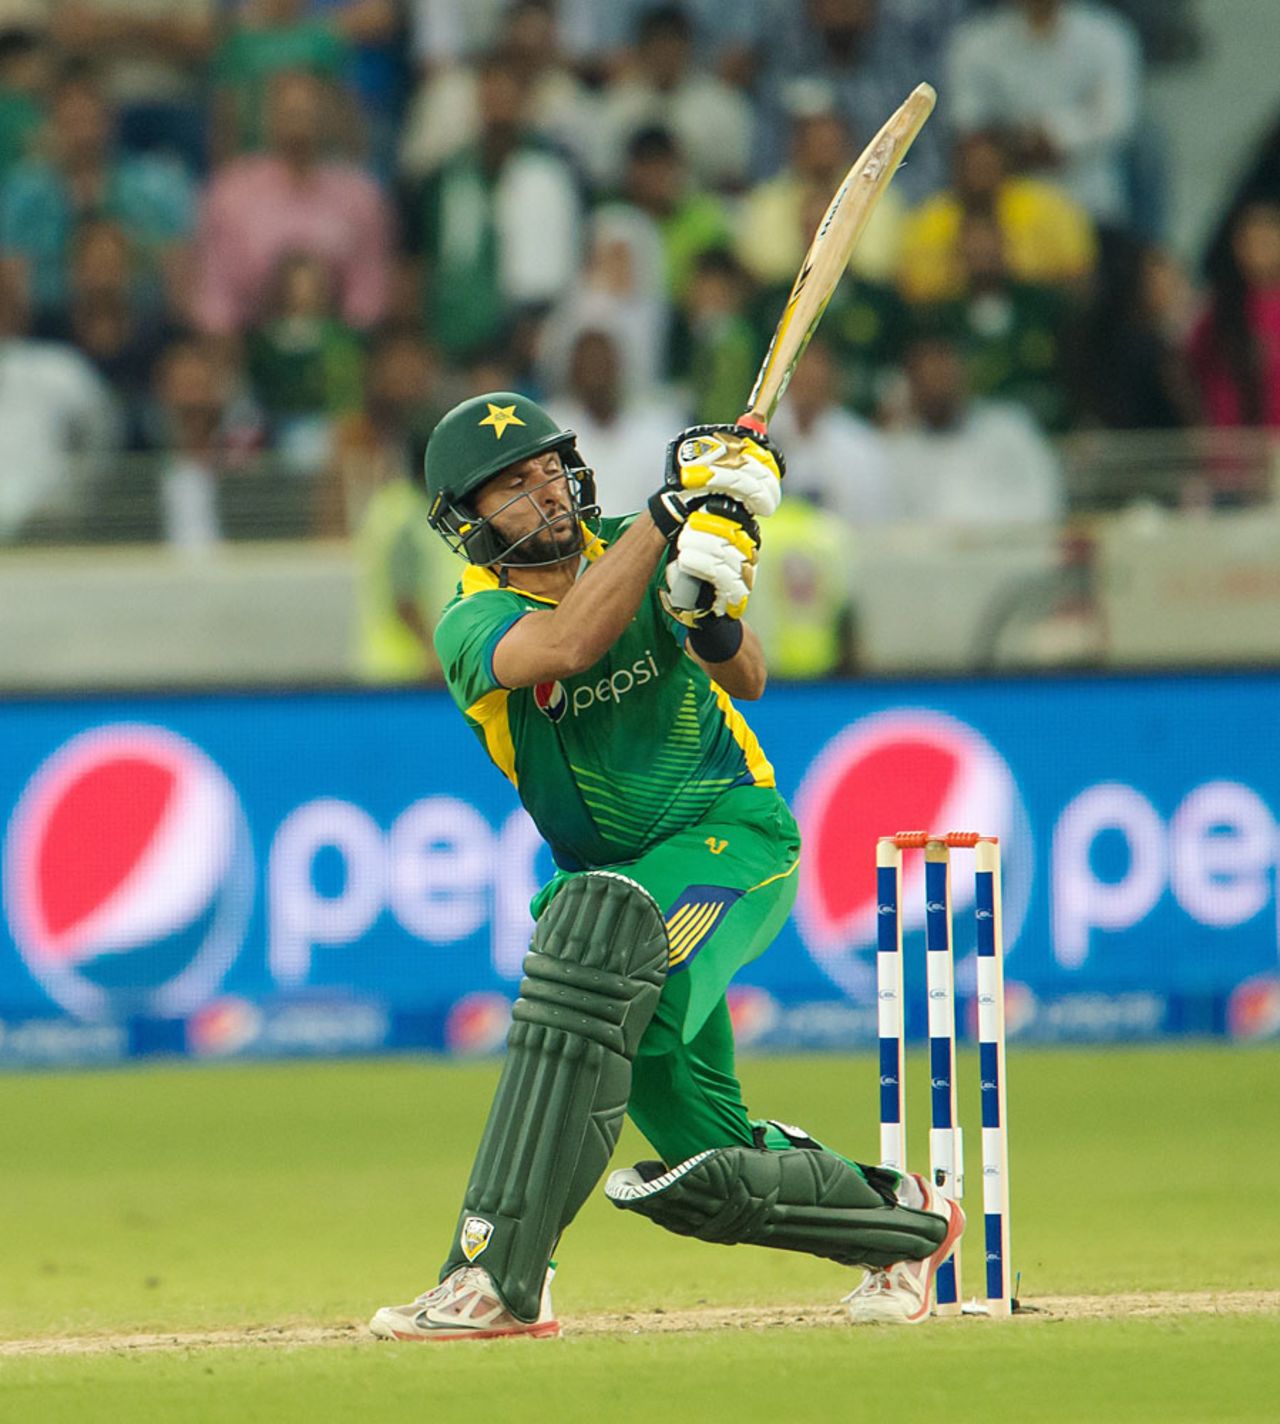 Shahid Afridi almost turned the match around with 24 off eight balls, Pakistan v England, 2nd T20, Dubai, November 27, 2015